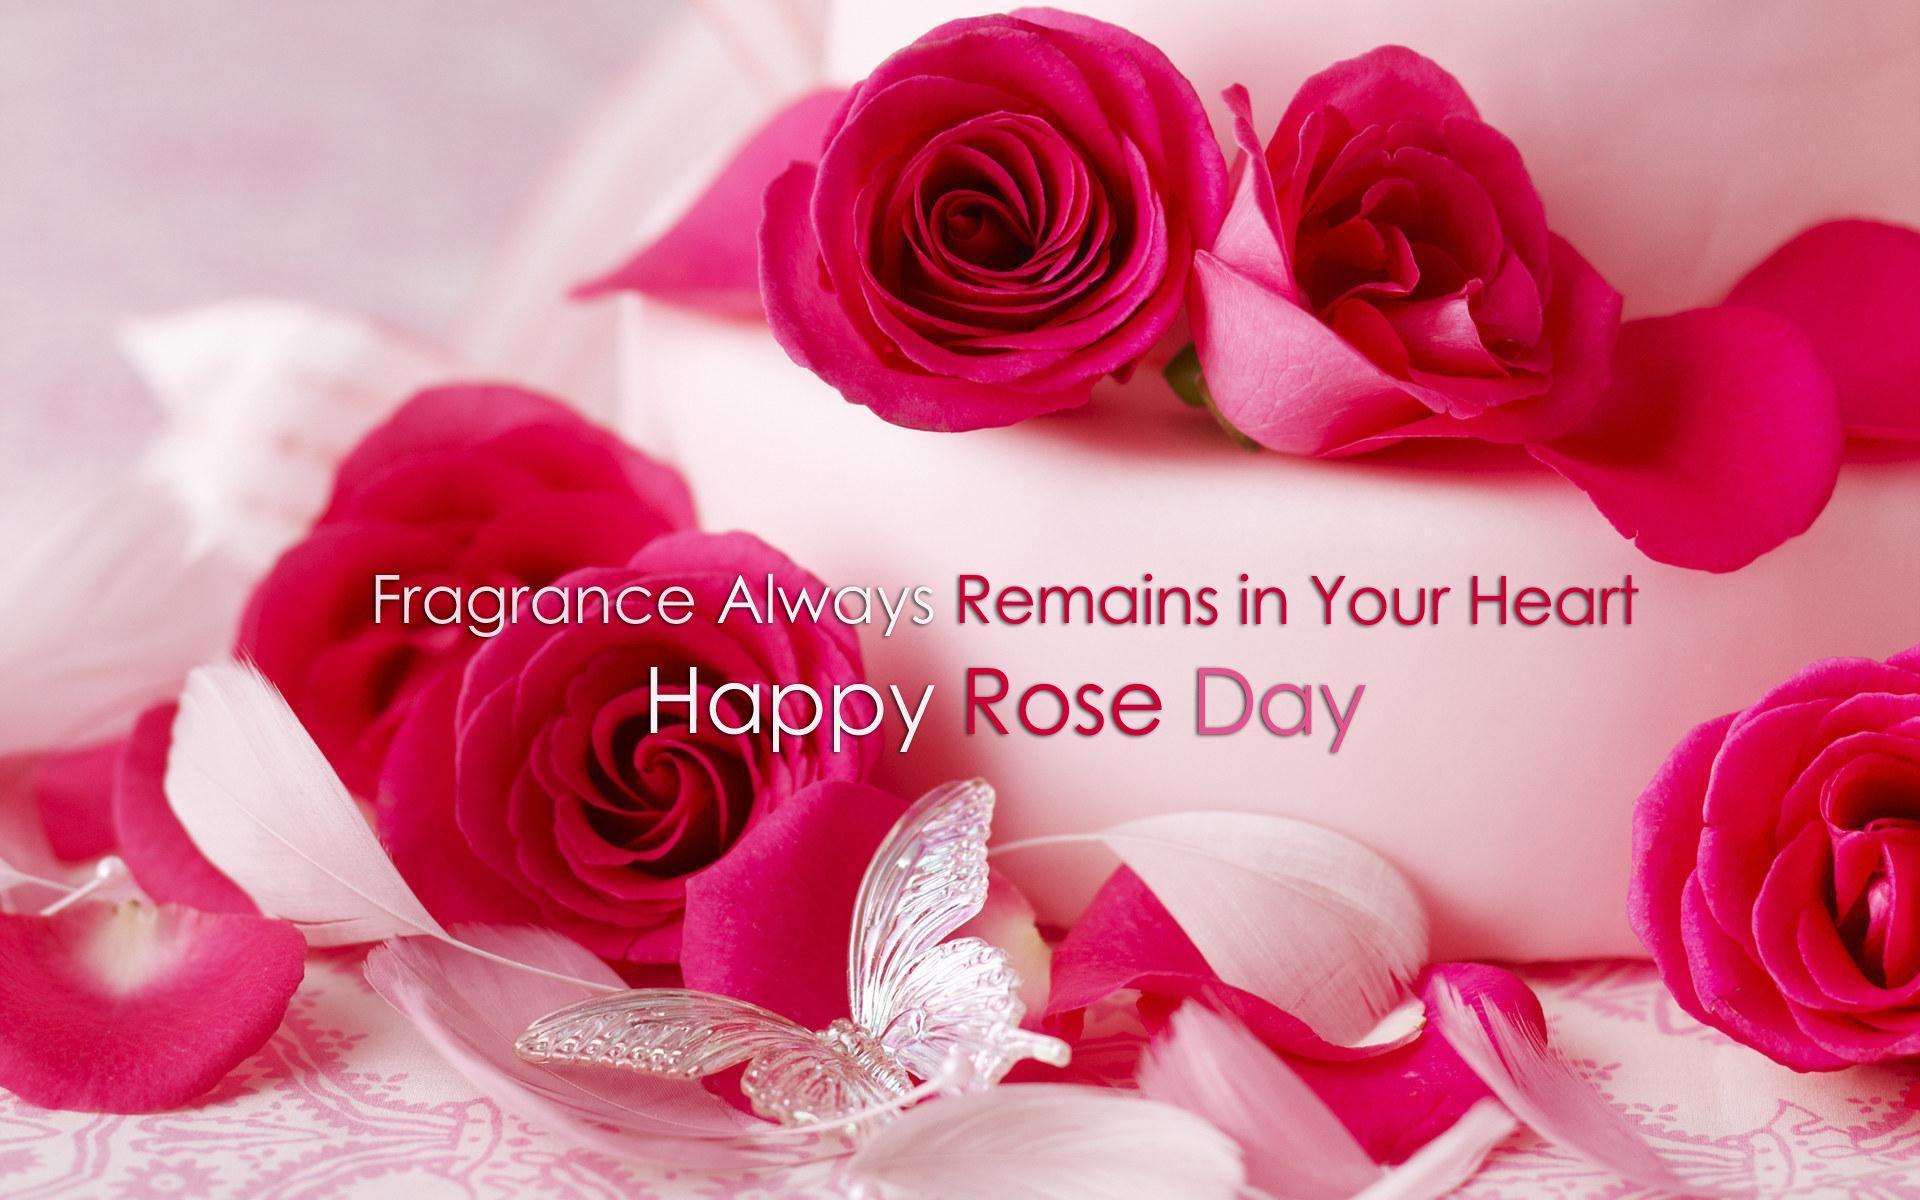 Happy Rose Day Wallpaper Quotes HD. Happy Rose Day Picture Quotes